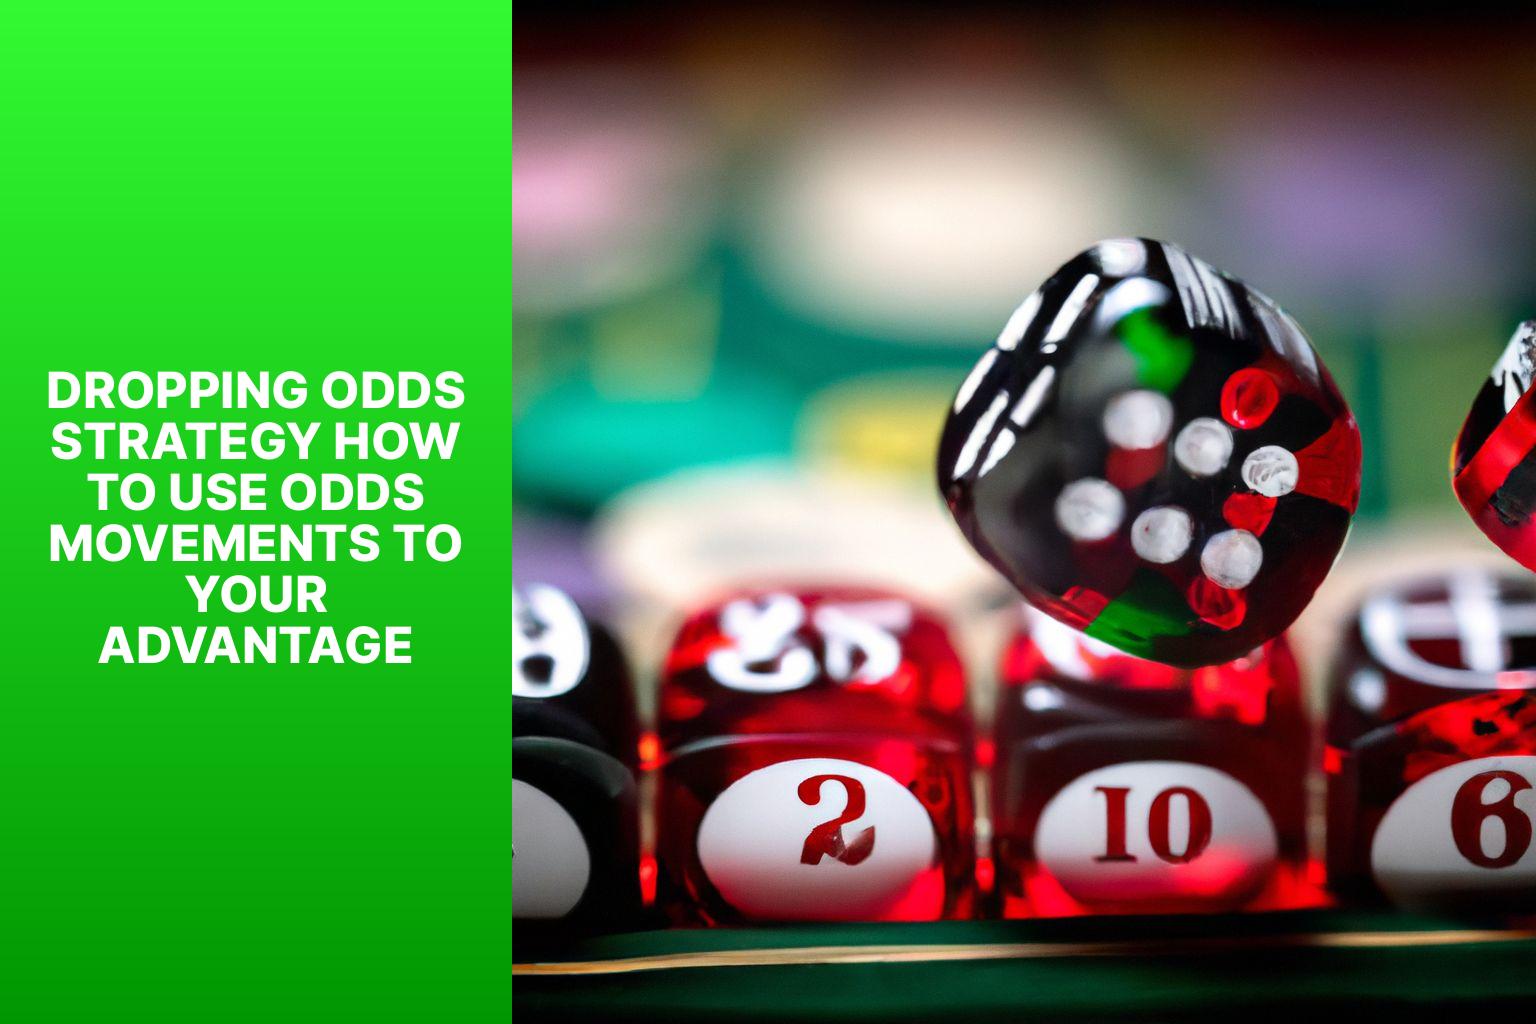 Dropping Odds Strategy How to Use Odds Movements to Your Advantage